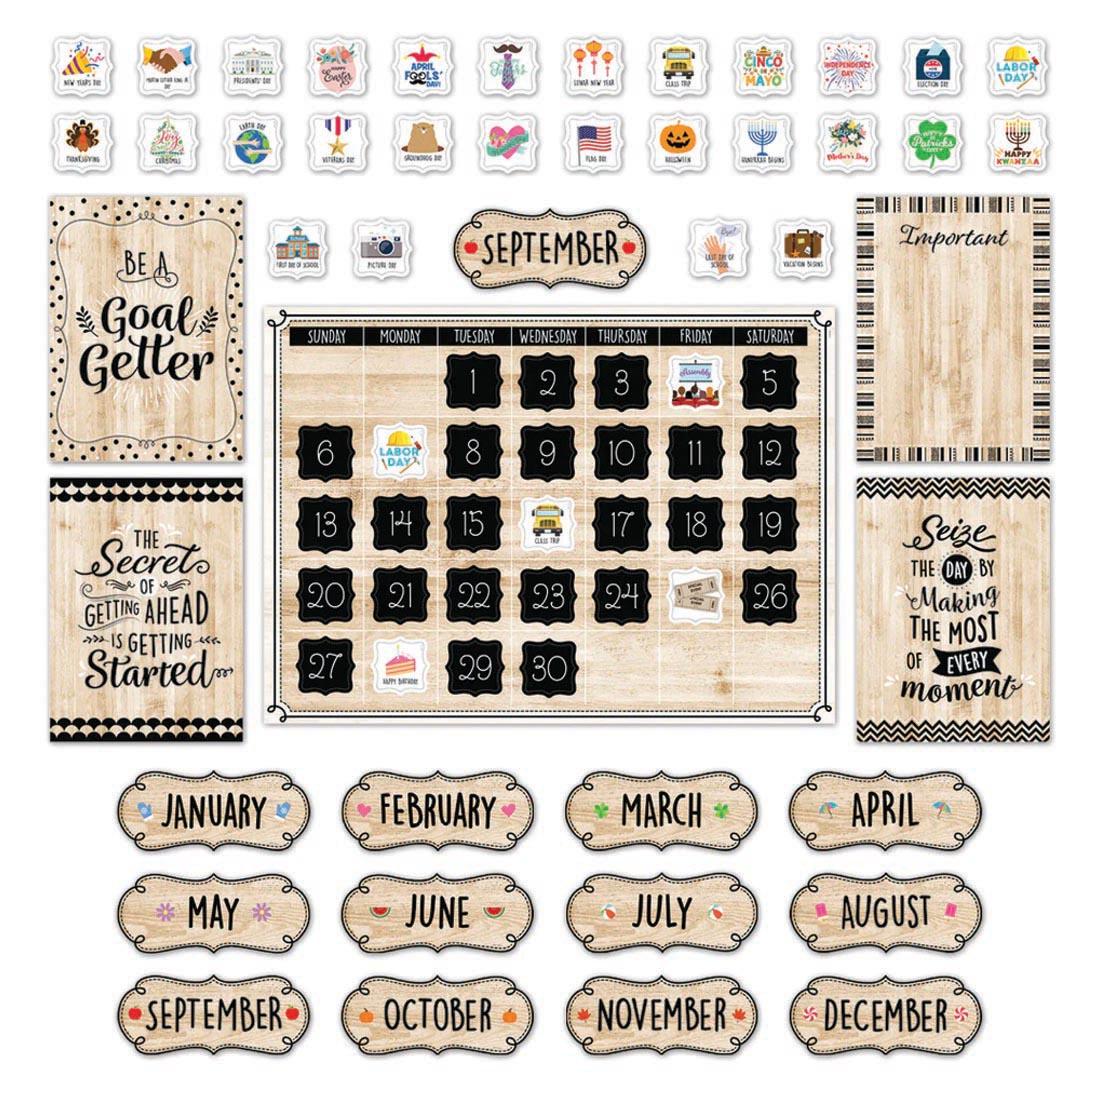 Black, White, and Wood Calendar Bulletin Board Set from the Core Decor collection by Creative Teaching Press